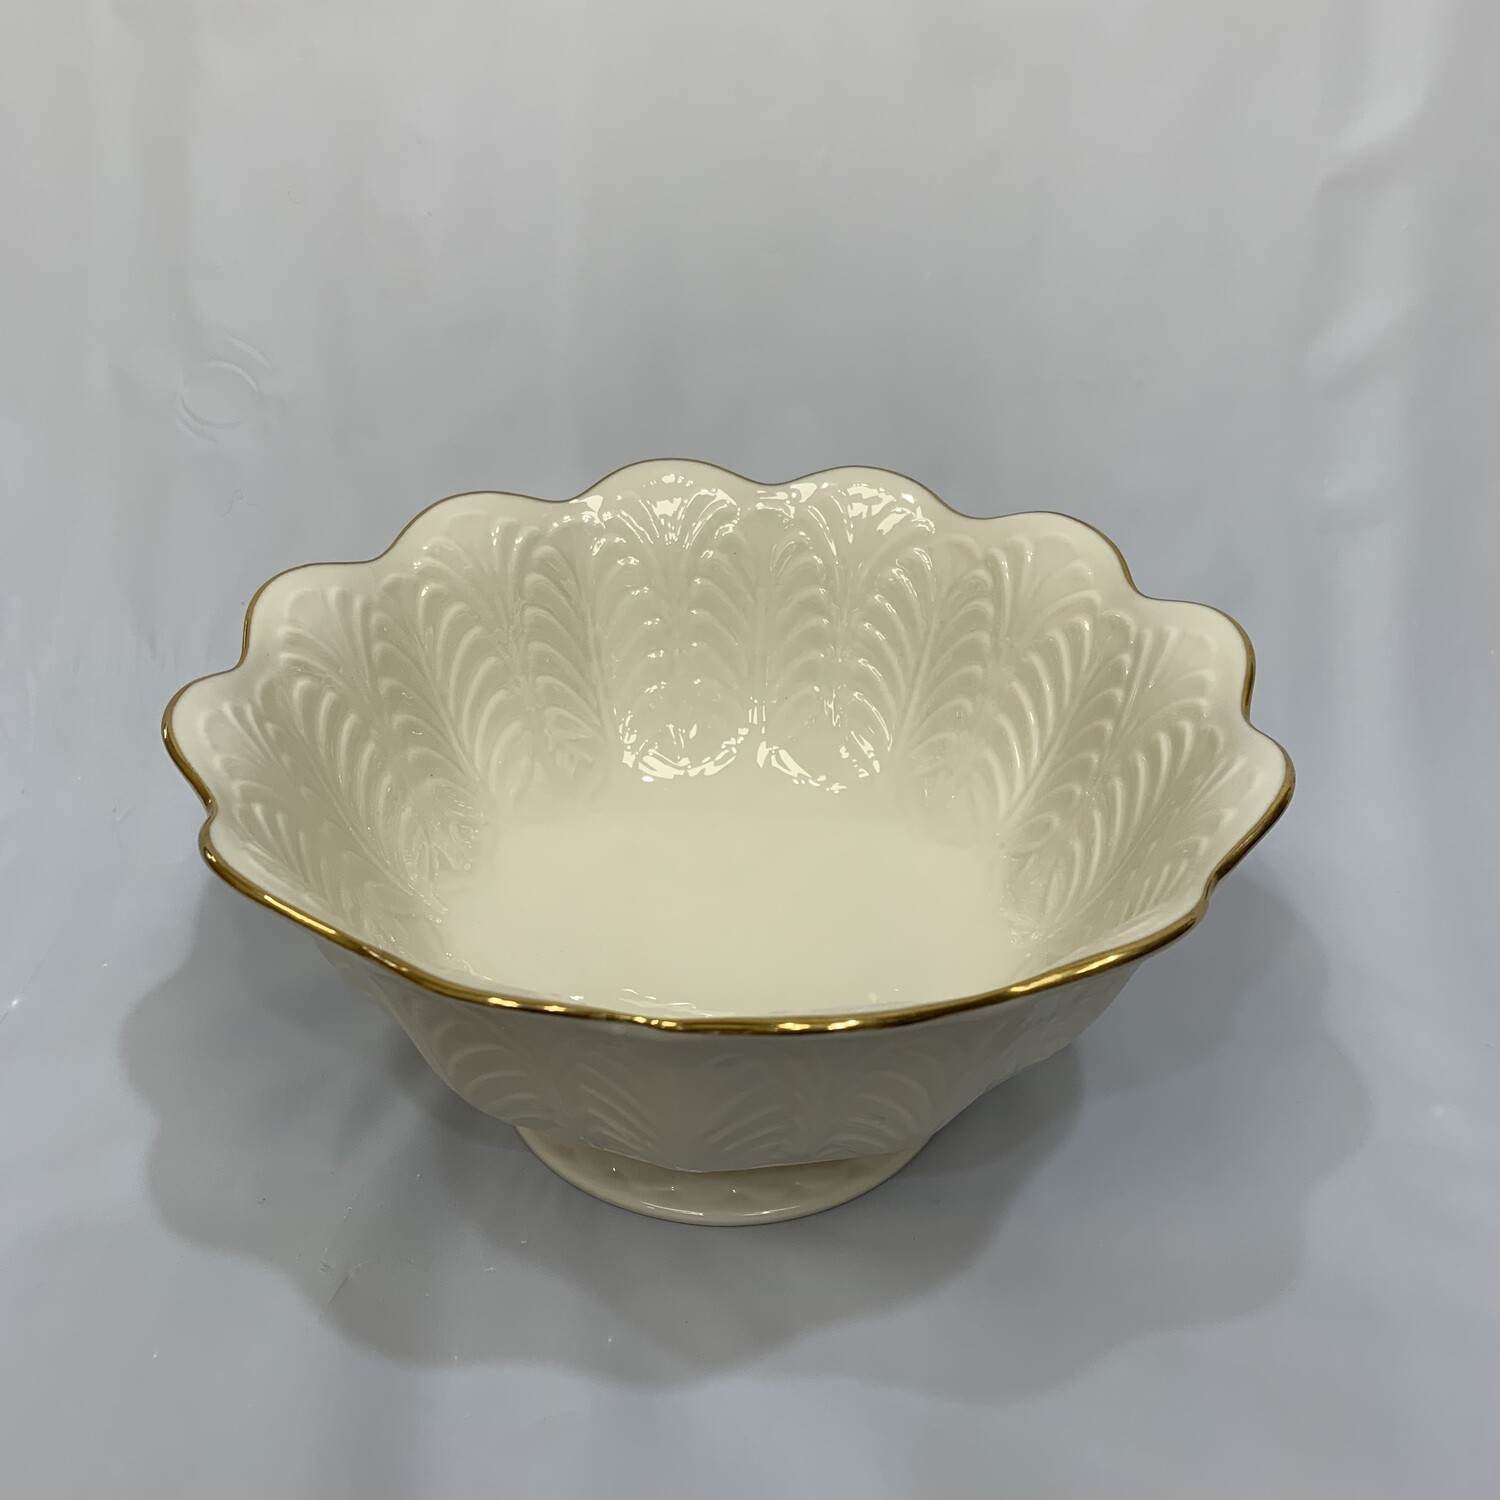 Lenox Footed Centerpiece Bowl